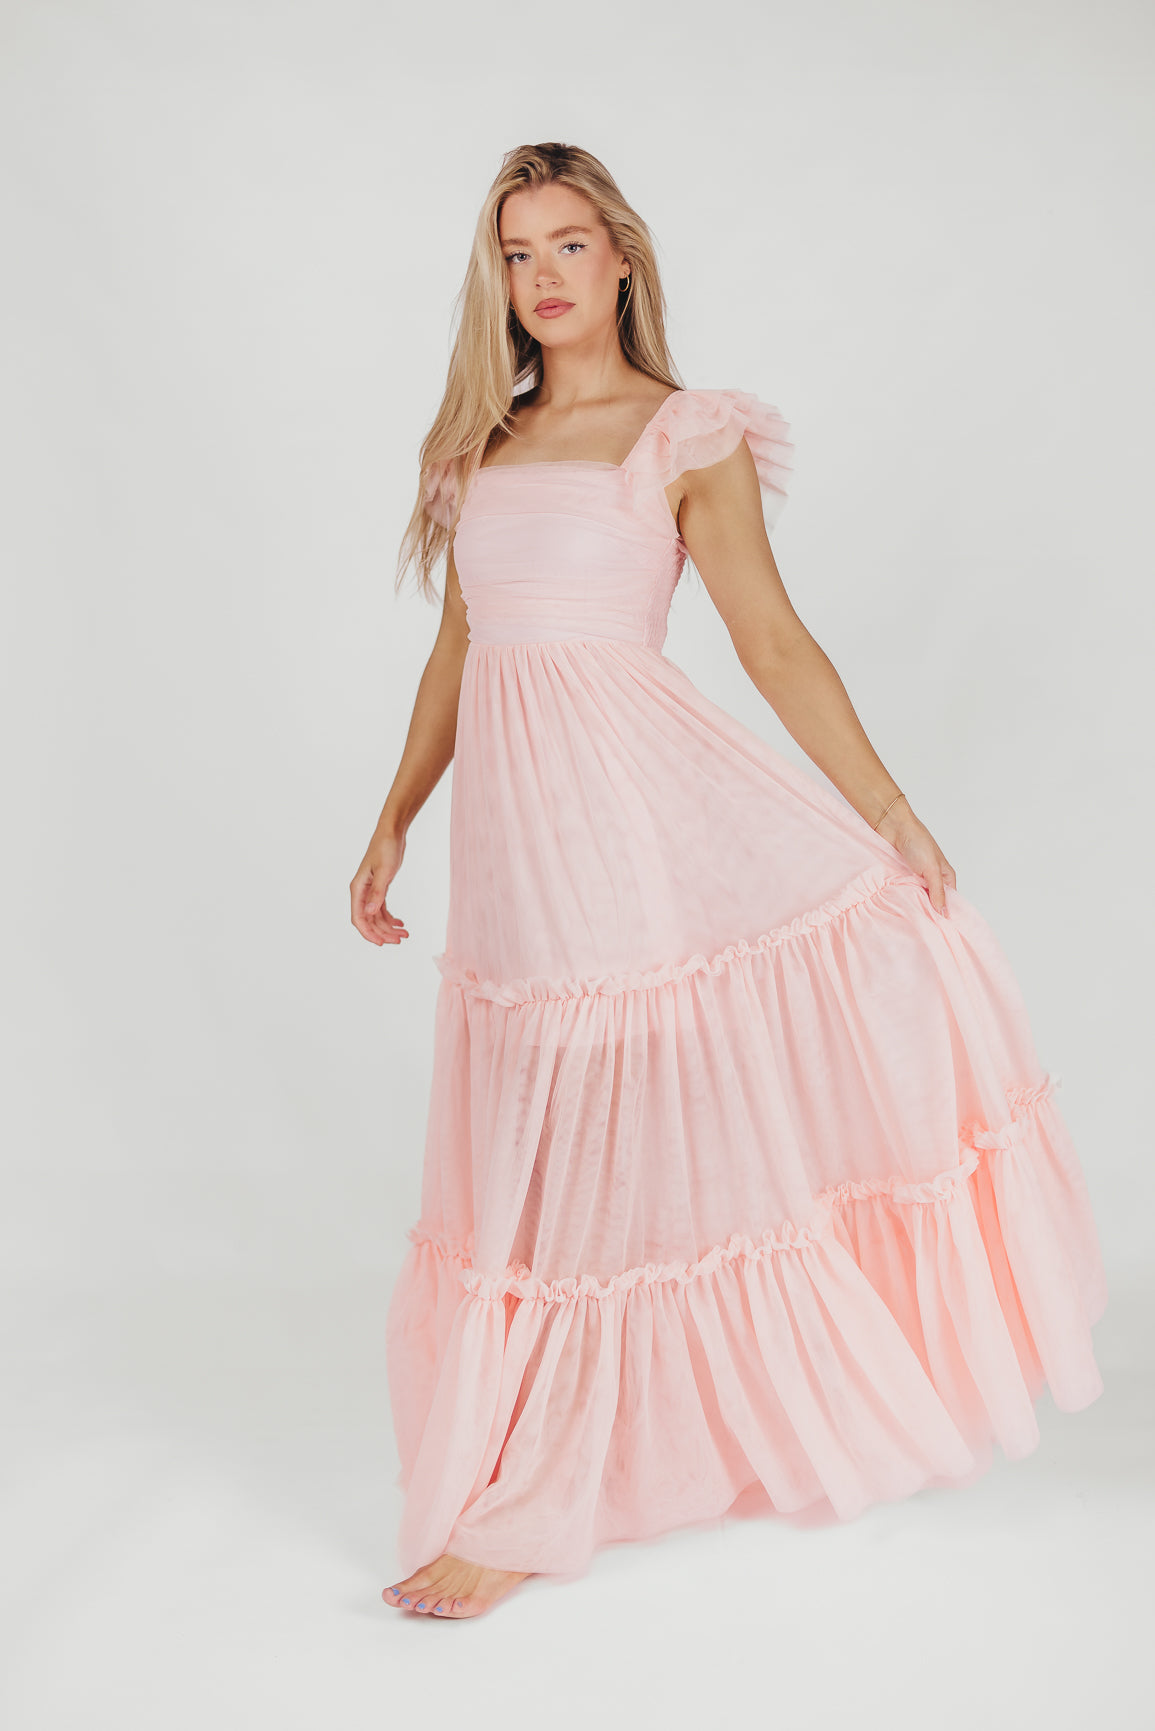 Bella Tiered Tulle Maxi Dress in Pink Blush - Bump Friendly & Inclusive Sizing (S-3XL)